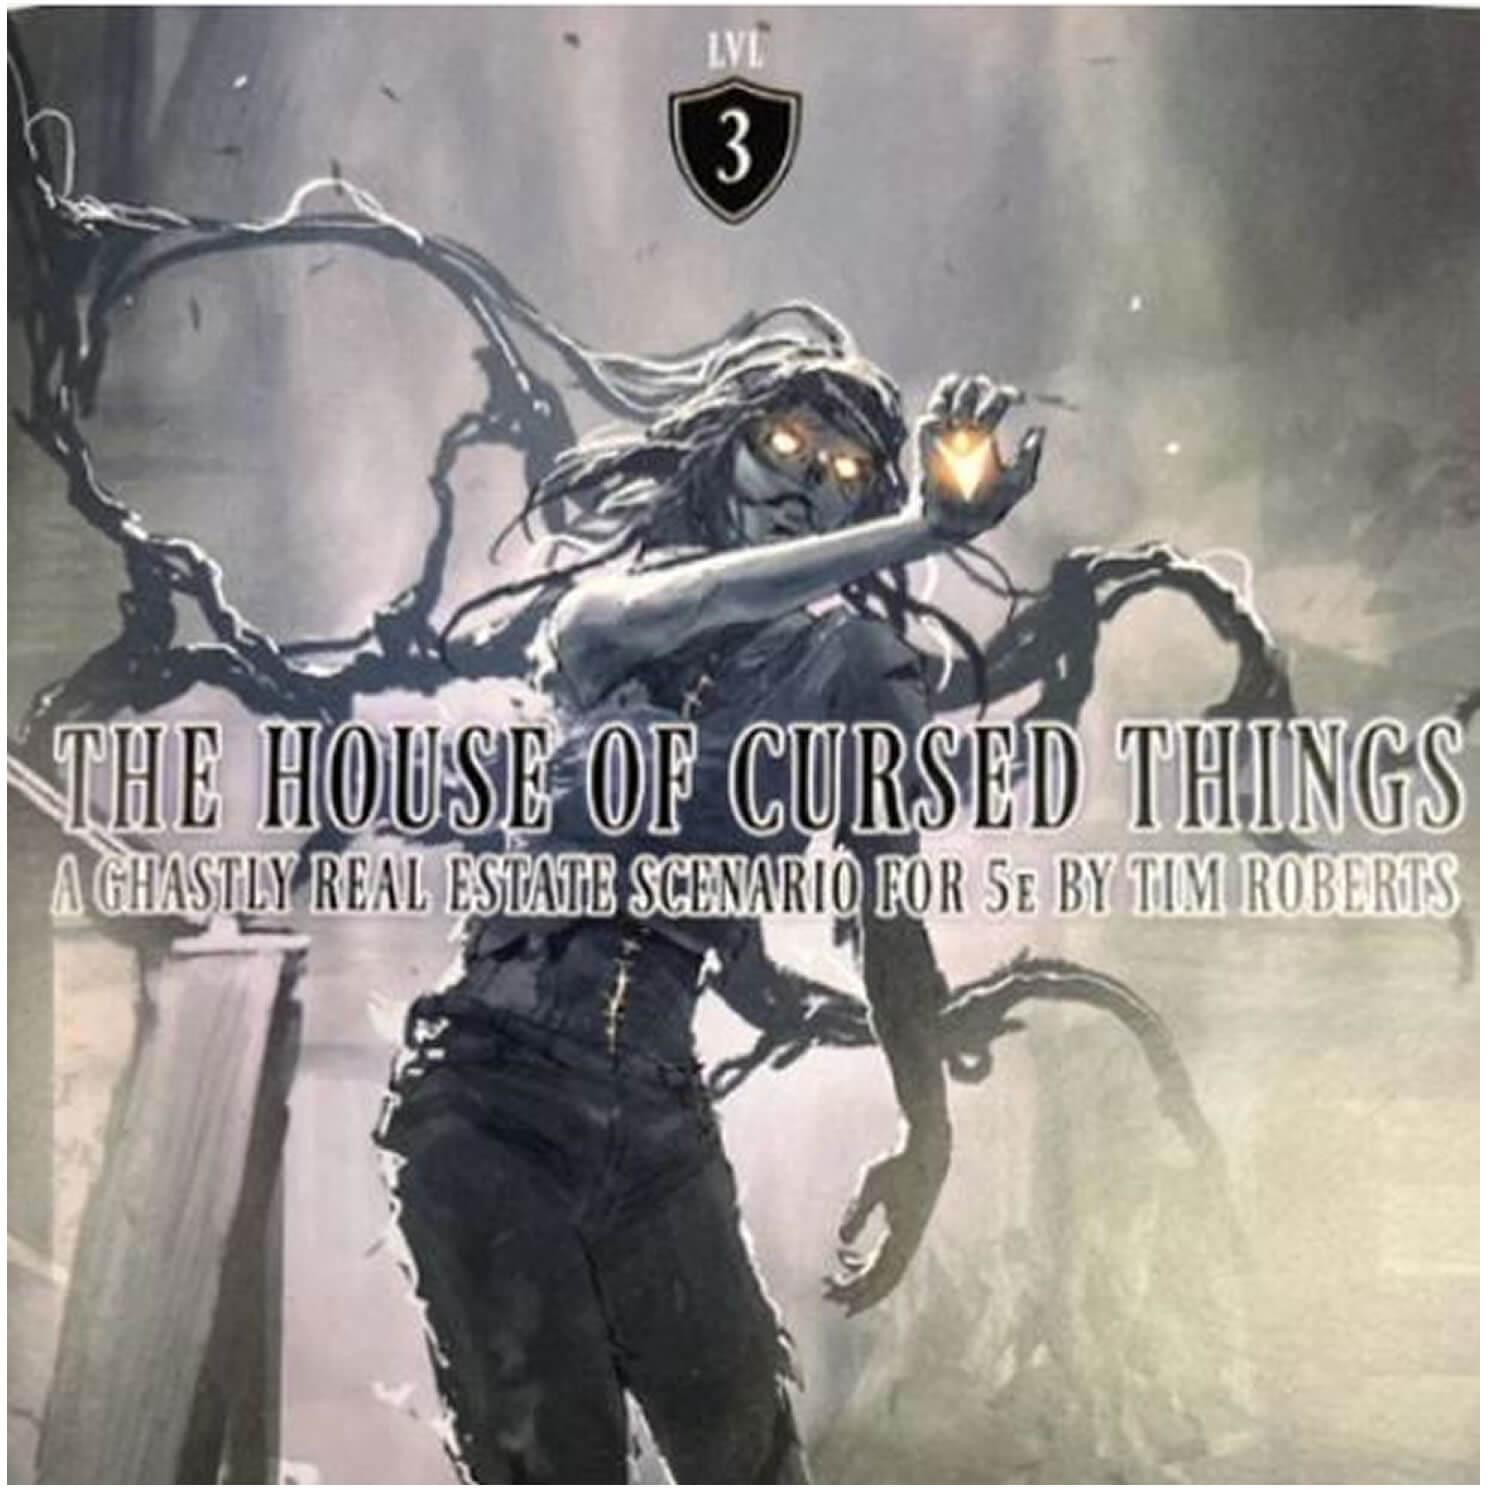 The House of Cursed Things